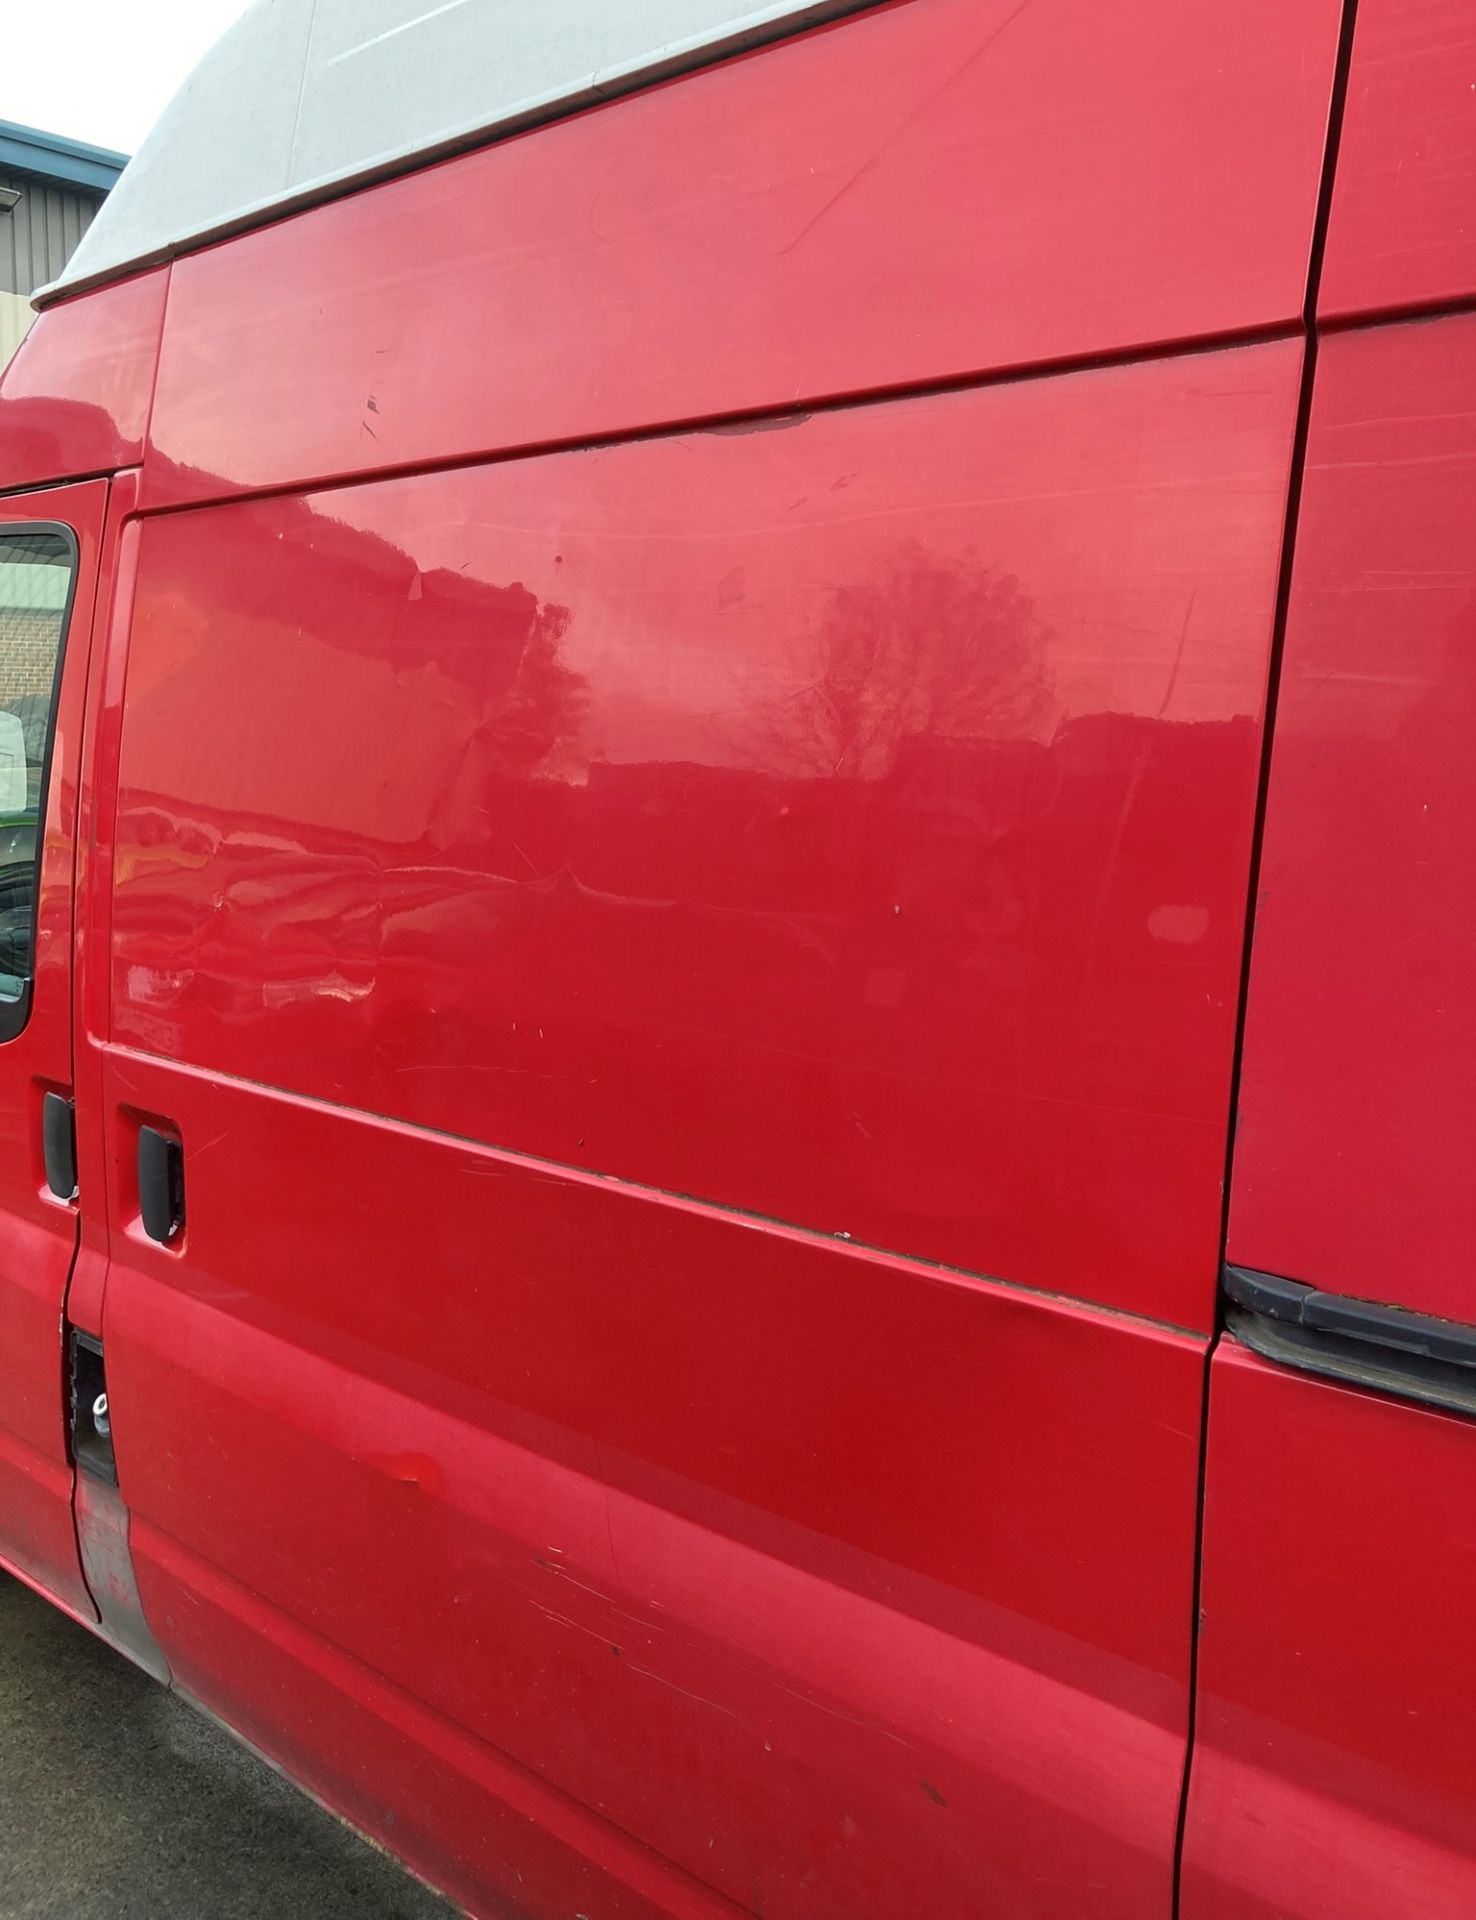 FORD TRANSIT 2.2 110 T300M FWD PANEL VAN - Diesel - Red. On the instructions of: A retained client. - Image 6 of 8